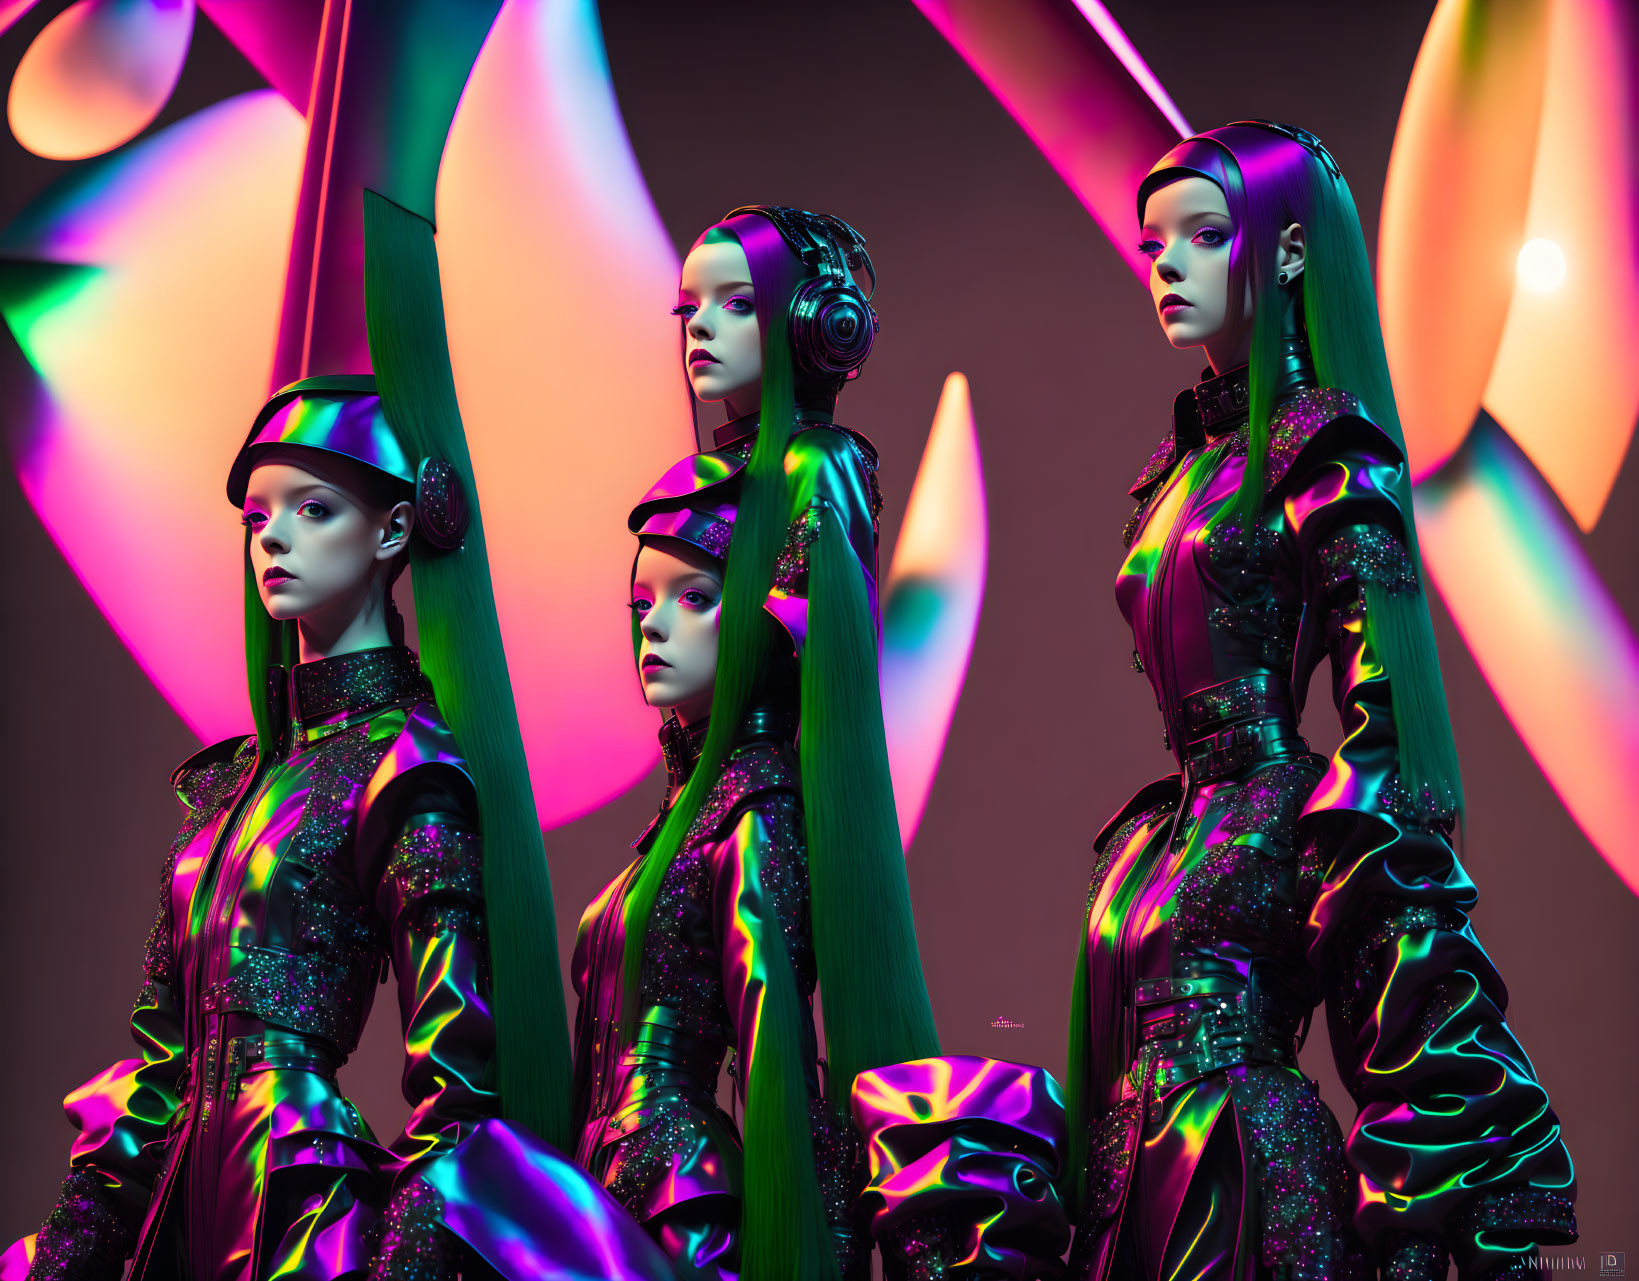 Four futuristic female figures in iridescent, structured outfits with pointed shoulder pads and sleek hats against a